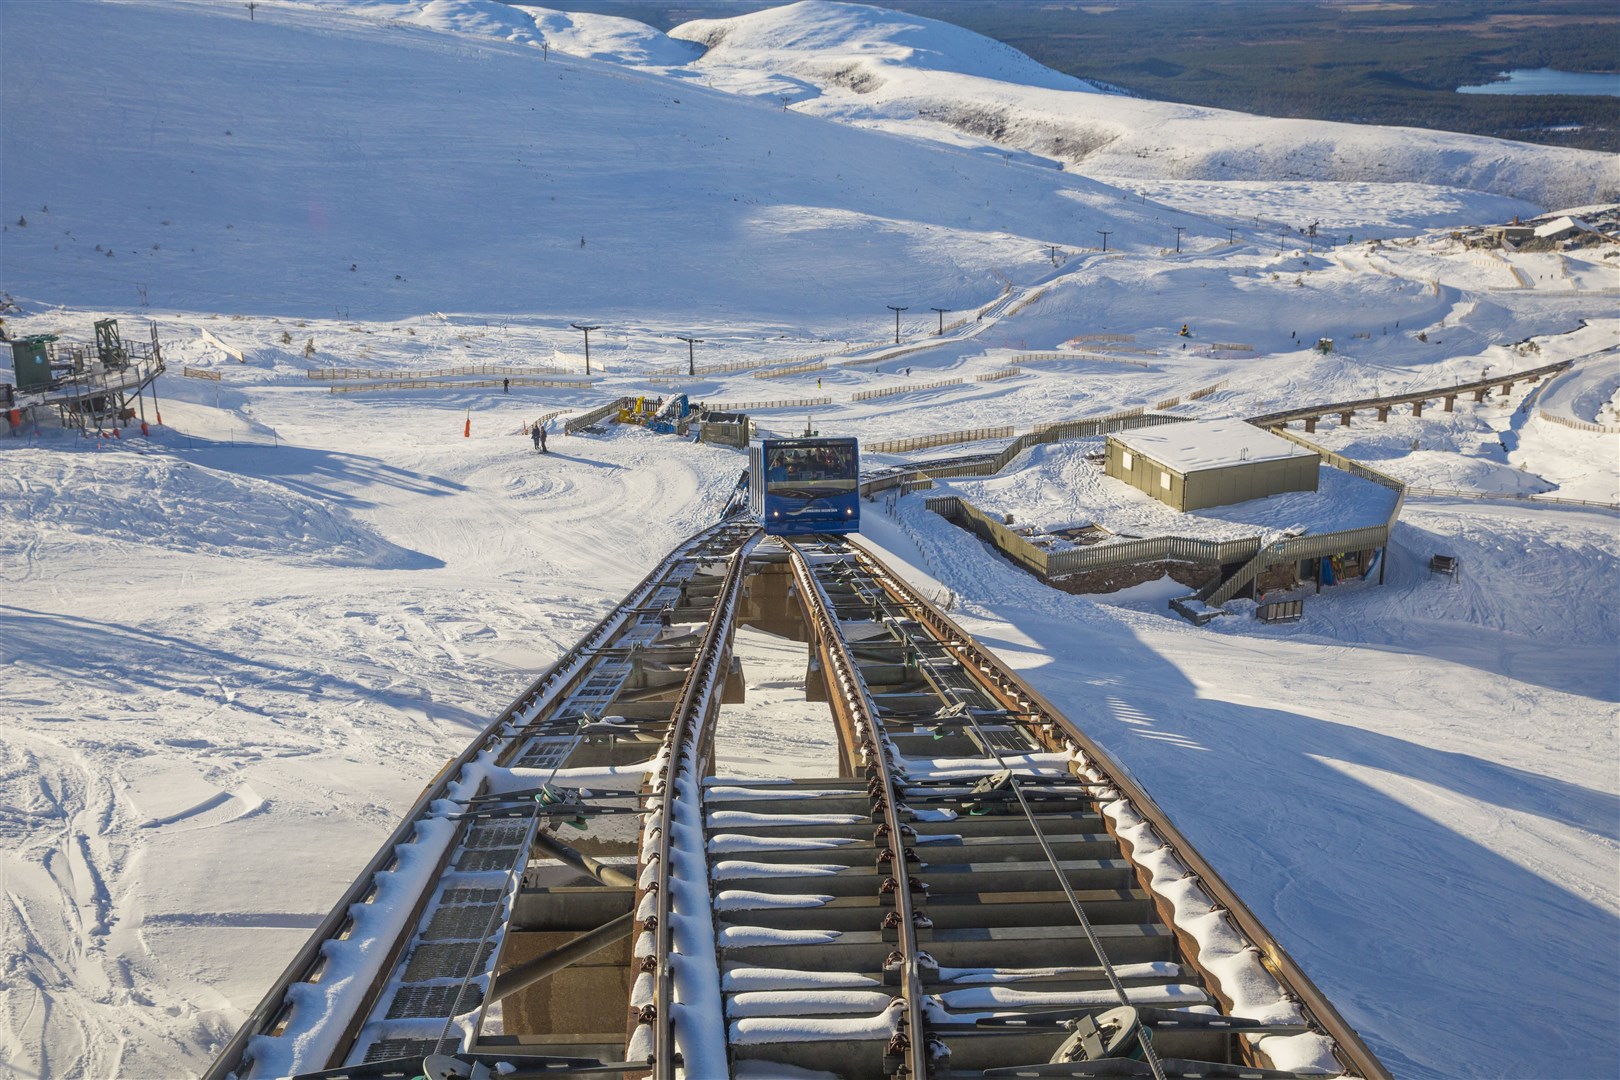 The Cairngorm funicular has been out of service since September 2018 because of safety concerns over the concrete pillars and bearings which carry the two kilometres of track.